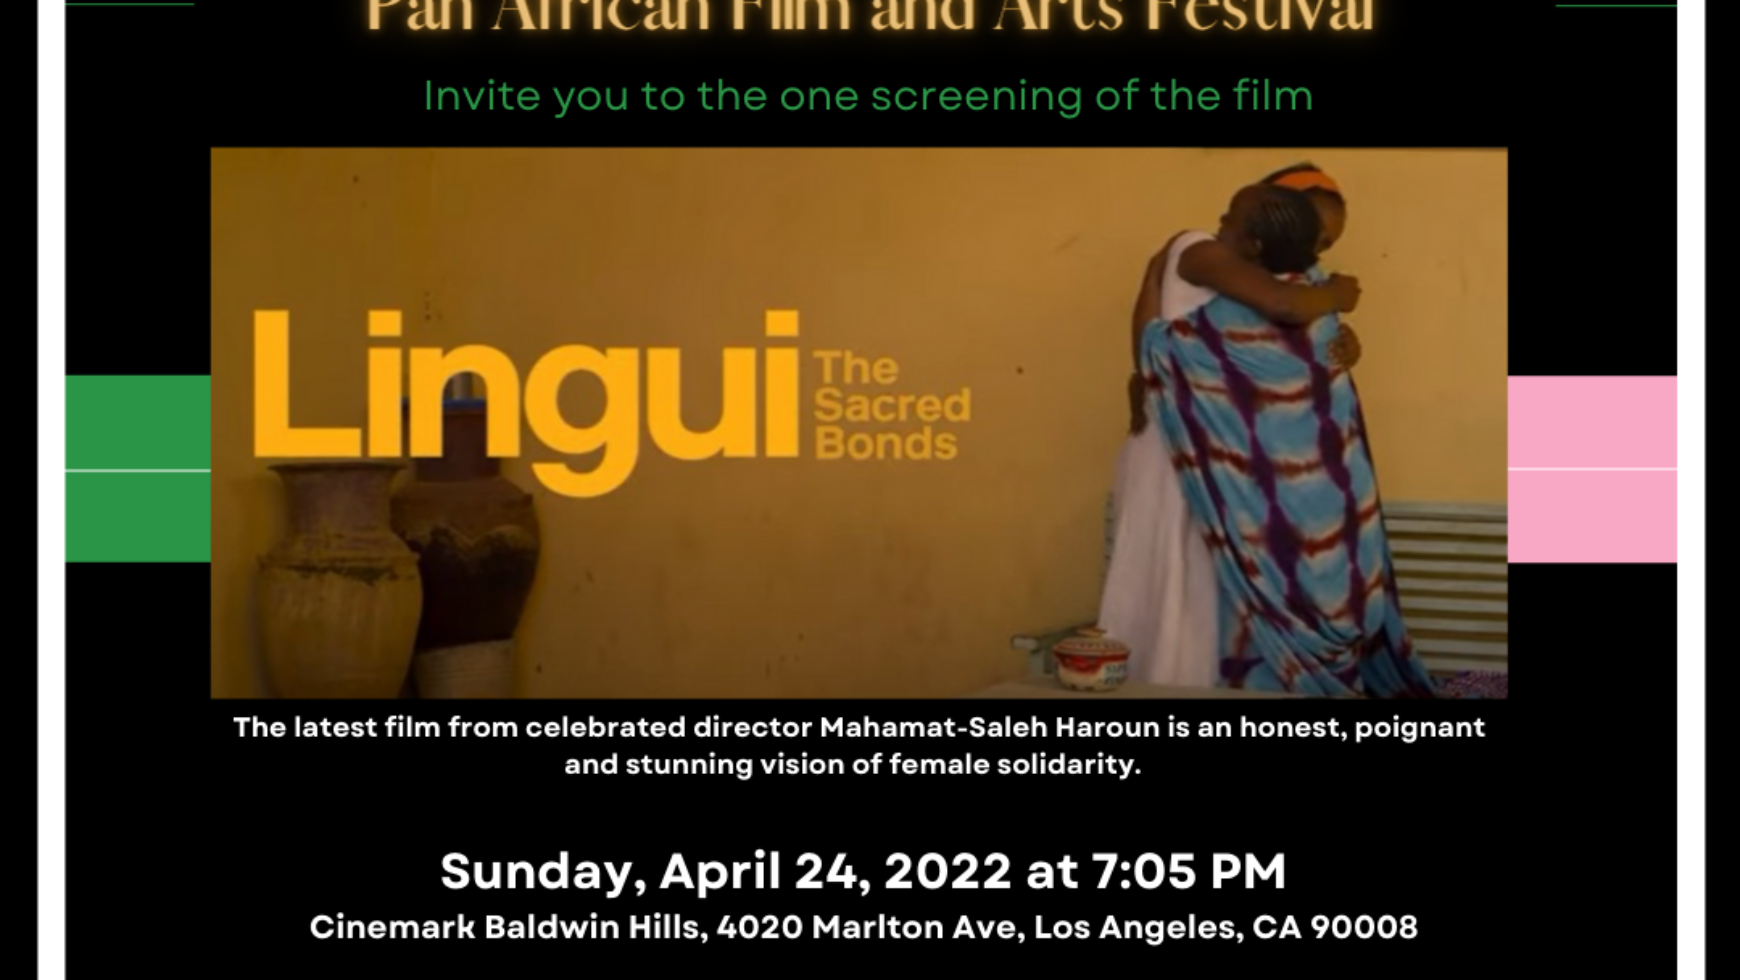 MLO is a Community Partner at PAFF for the film Lingui, The Sacred Bonds